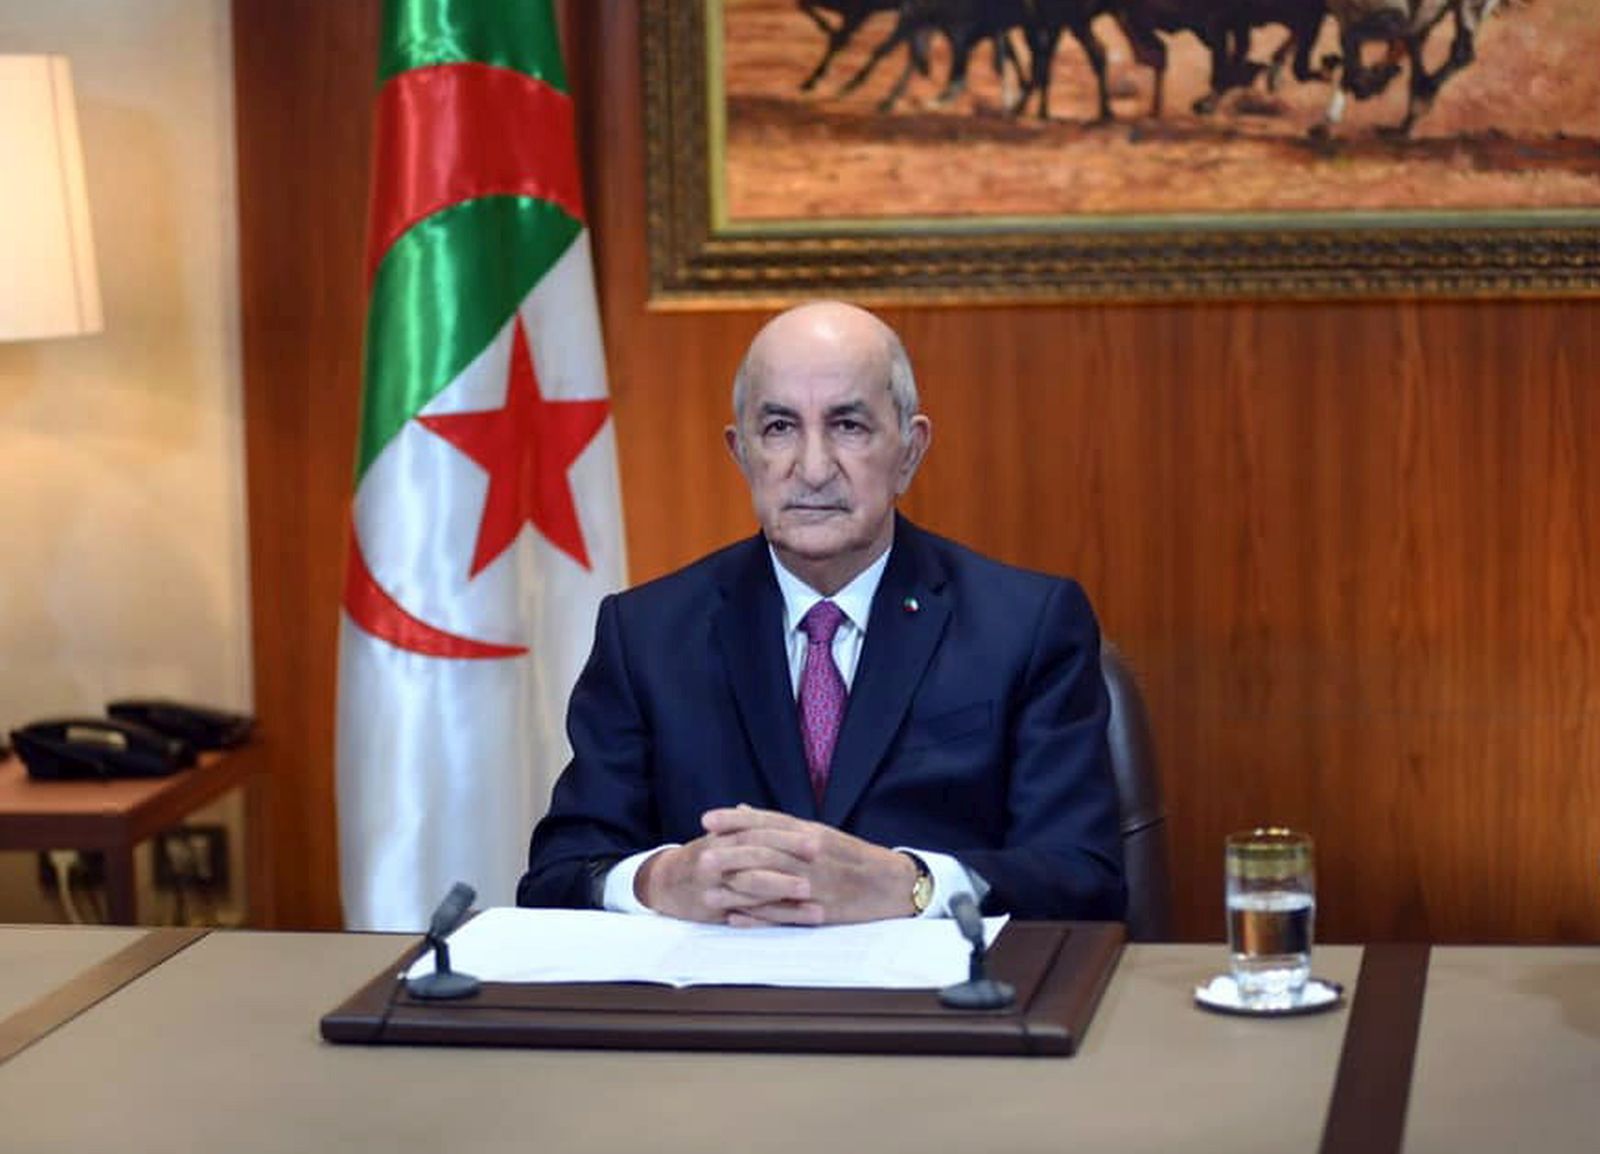 epa09022390 A handout photo made available by the Algeria Presidency Press Service shows Algerian President Abdelmadjid Tebboune during his speech at the Presidential Palace in Algiers, Algeria, 18 February 2021. Algerian President Abdelmadjid Tebboune announced, in a speech on television on 18 February, the dissolution of the current National People's Assembly (APN) and the organization of early legislative elections.  EPA/ALGERIA PRESIDENCY PRESS SERVICE / HANDOUT  HANDOUT EDITORIAL USE ONLY/NO SALES